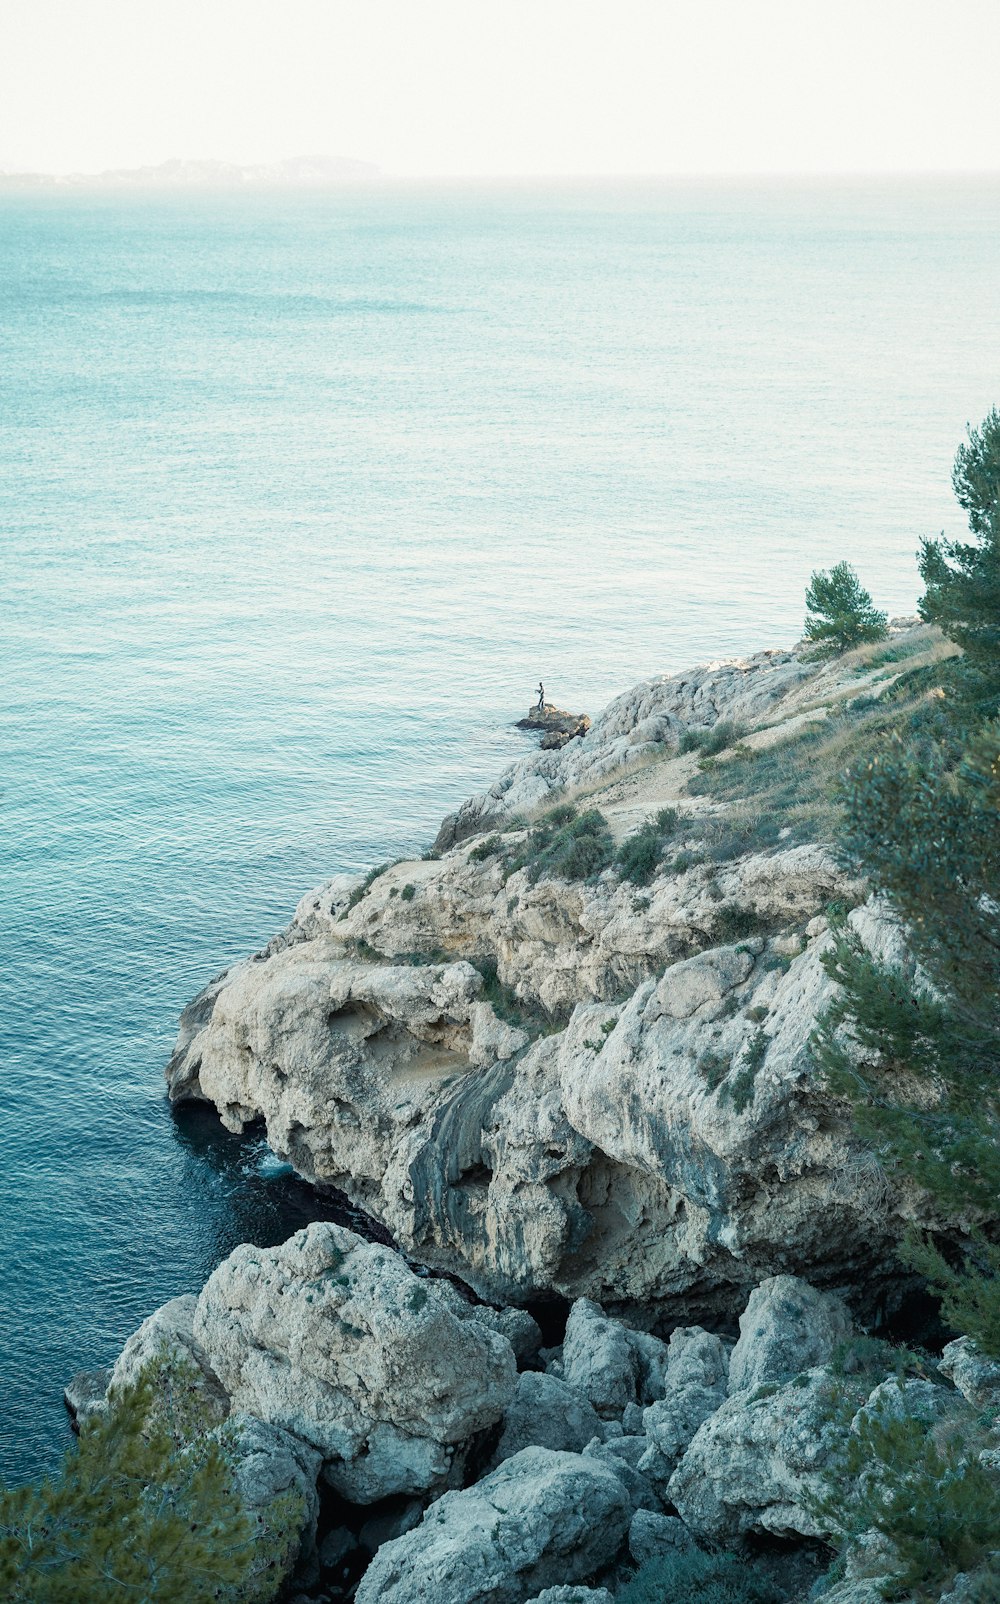 a person sitting on top of a rocky cliff next to the ocean